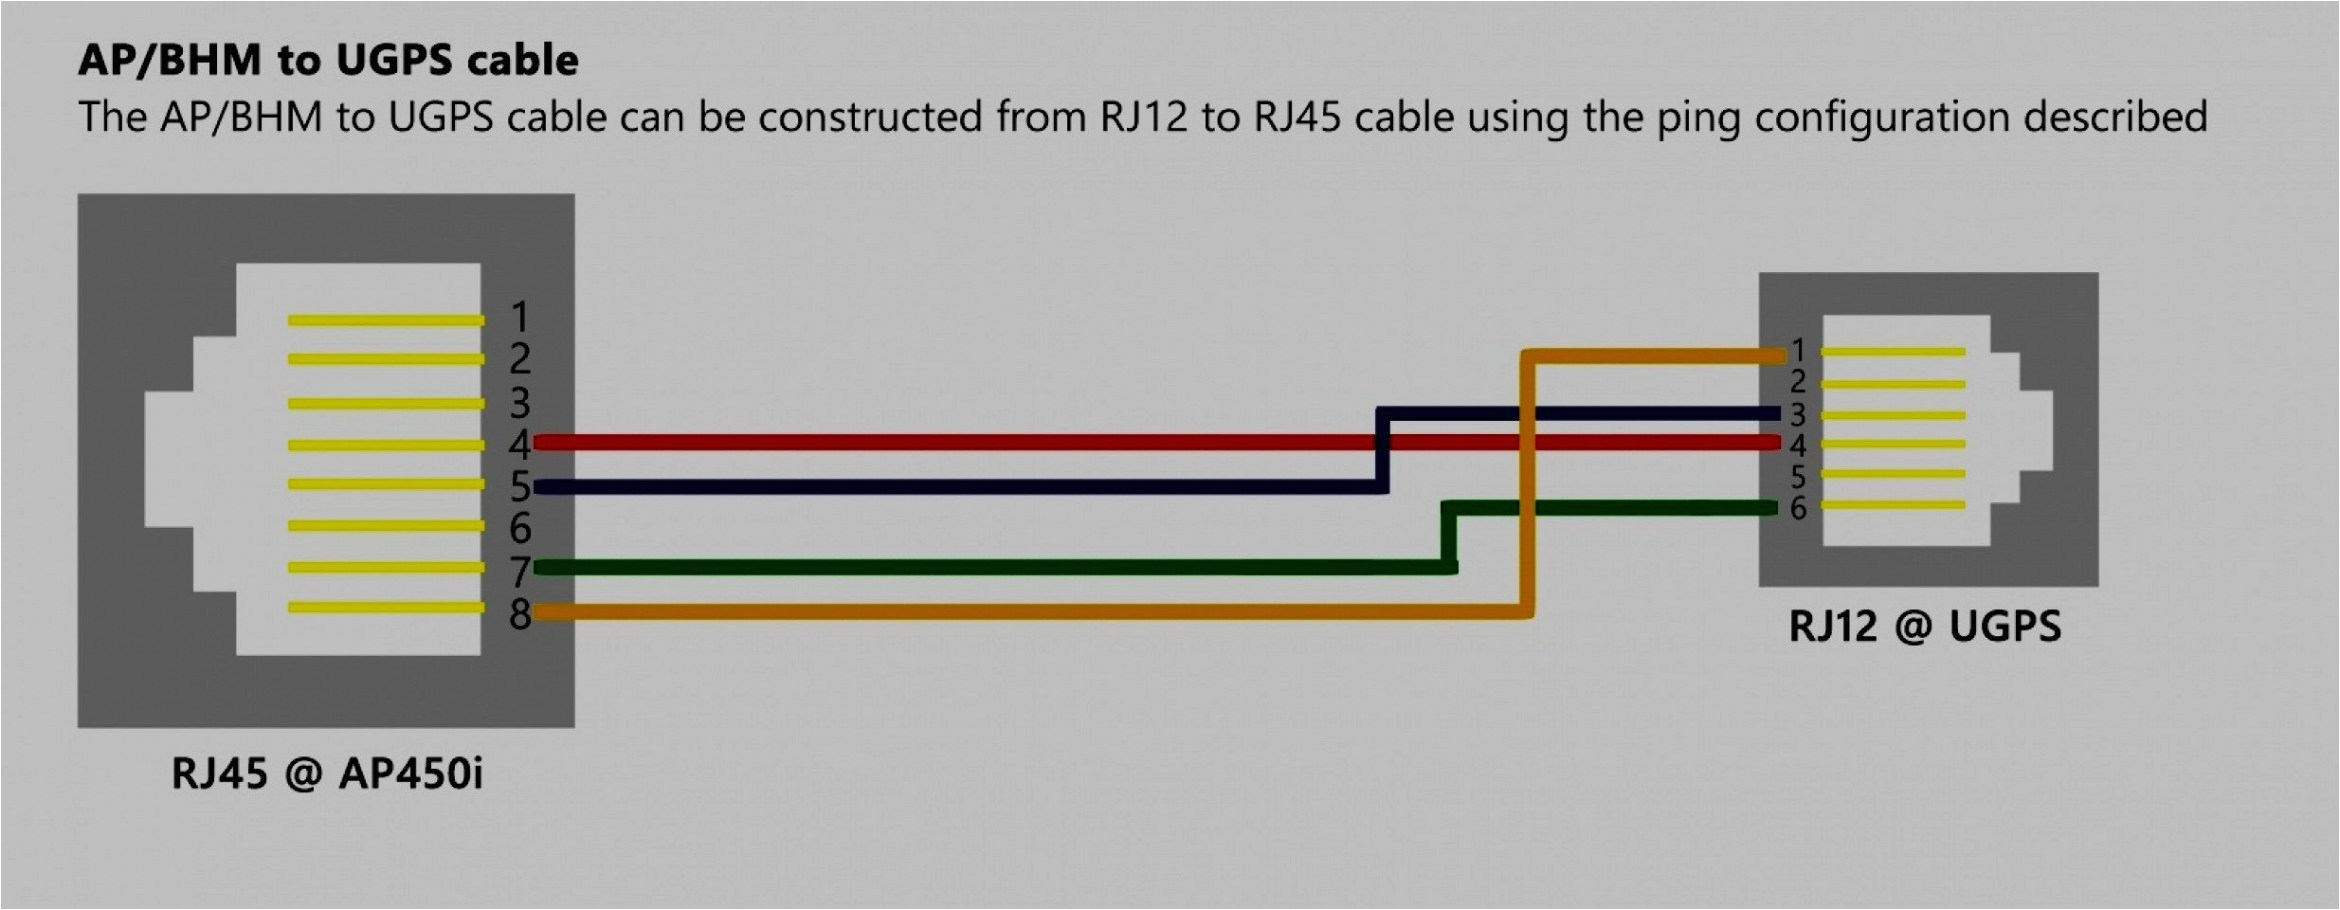 Rj12 Wiring Diagram Rj12 Wiring Diagram Wiring Diagram today